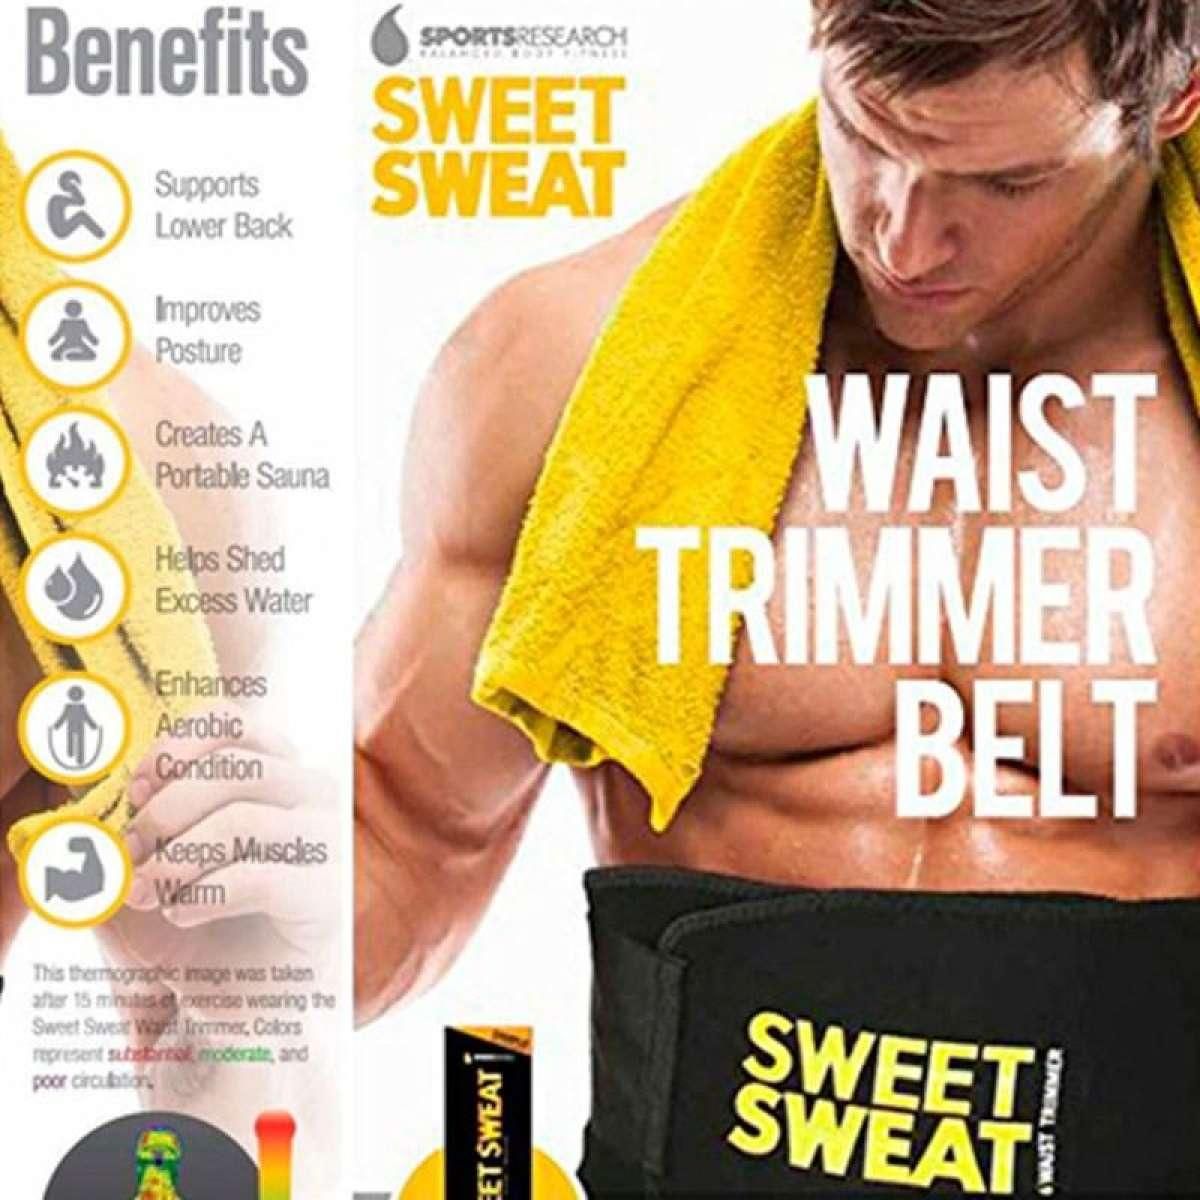 Buy Imported Best Quality waist trimmer belt for Men at Lowest